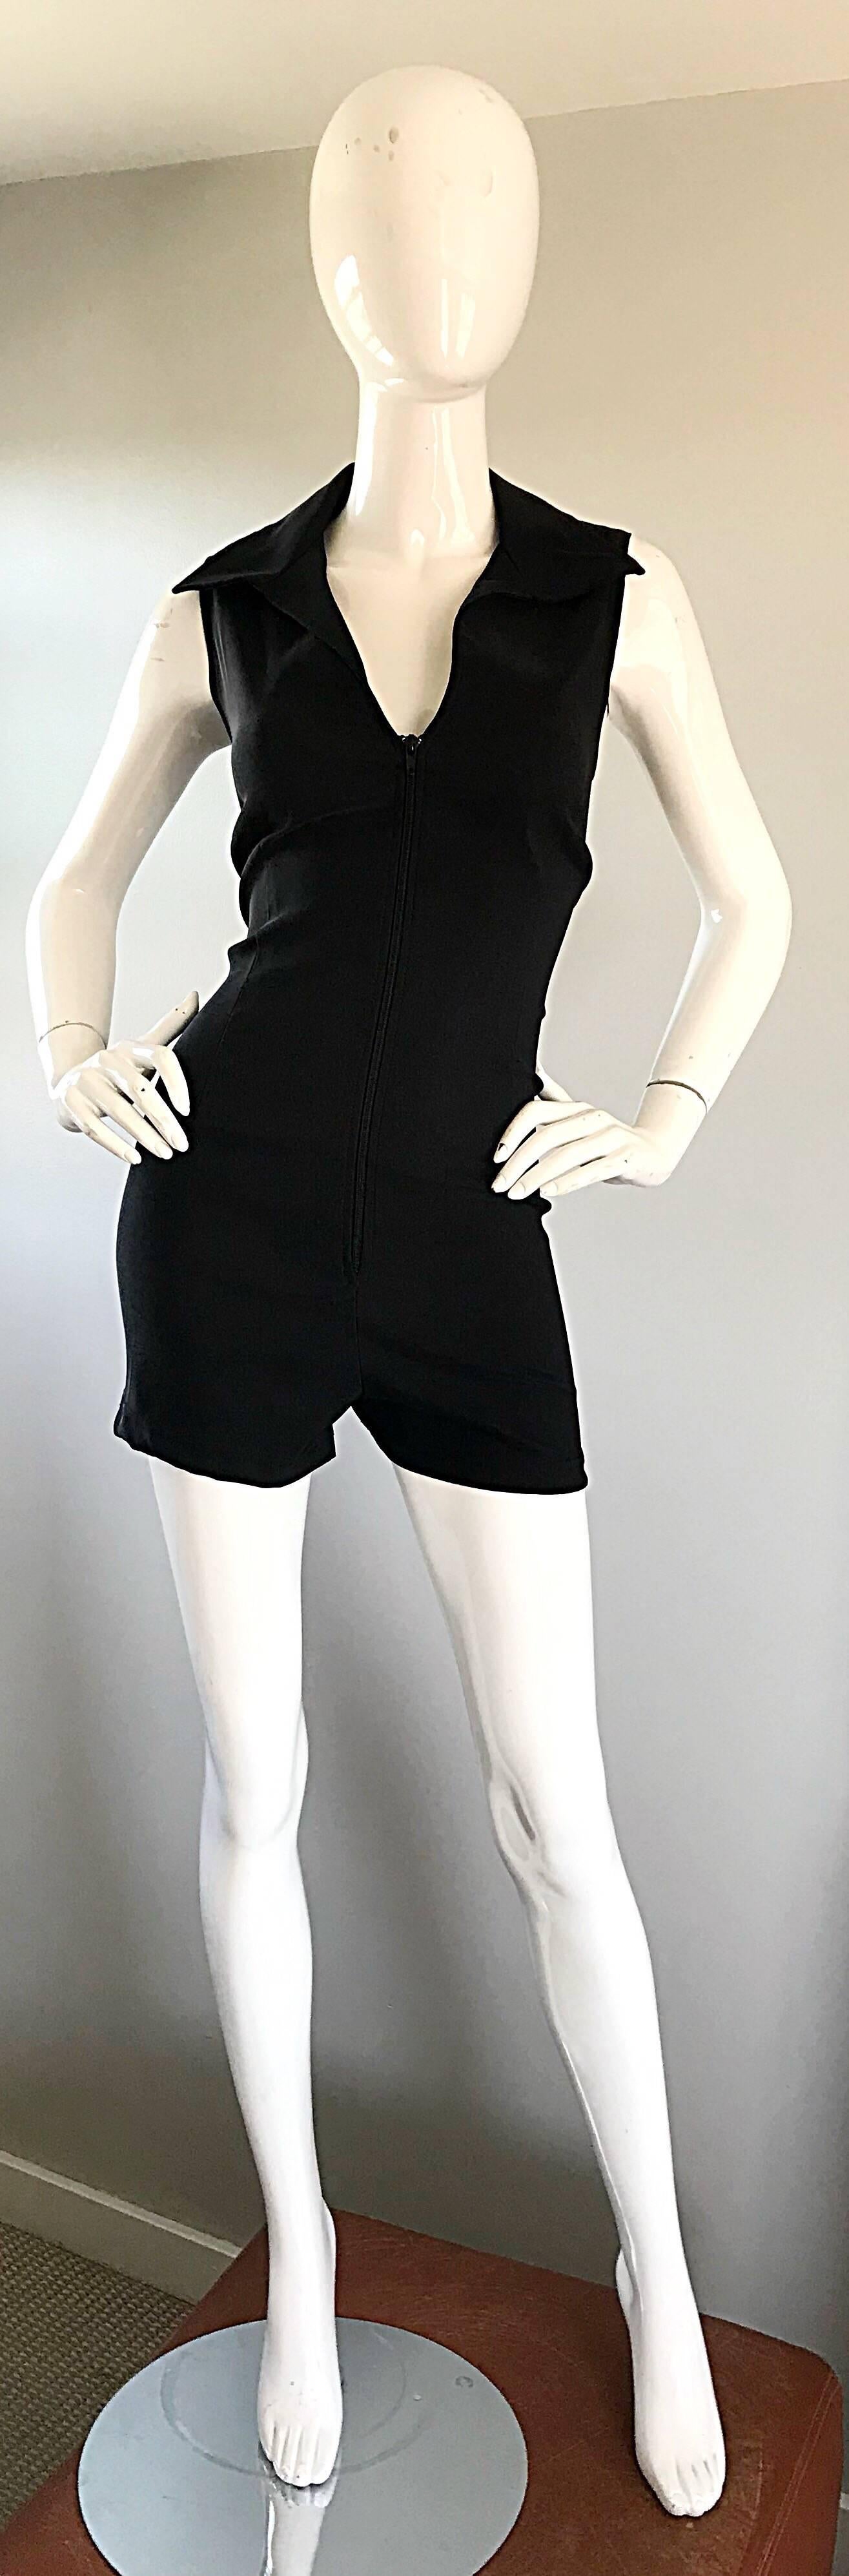 90s does 70s black one piece romper onesie! Features a hidden zipper up the front to adjust cleavage exposure. Exaggerated collar. Fabric stretches to fit. Great belted or alone, with flats, sandals, wedges, heels or boots. In great condition.